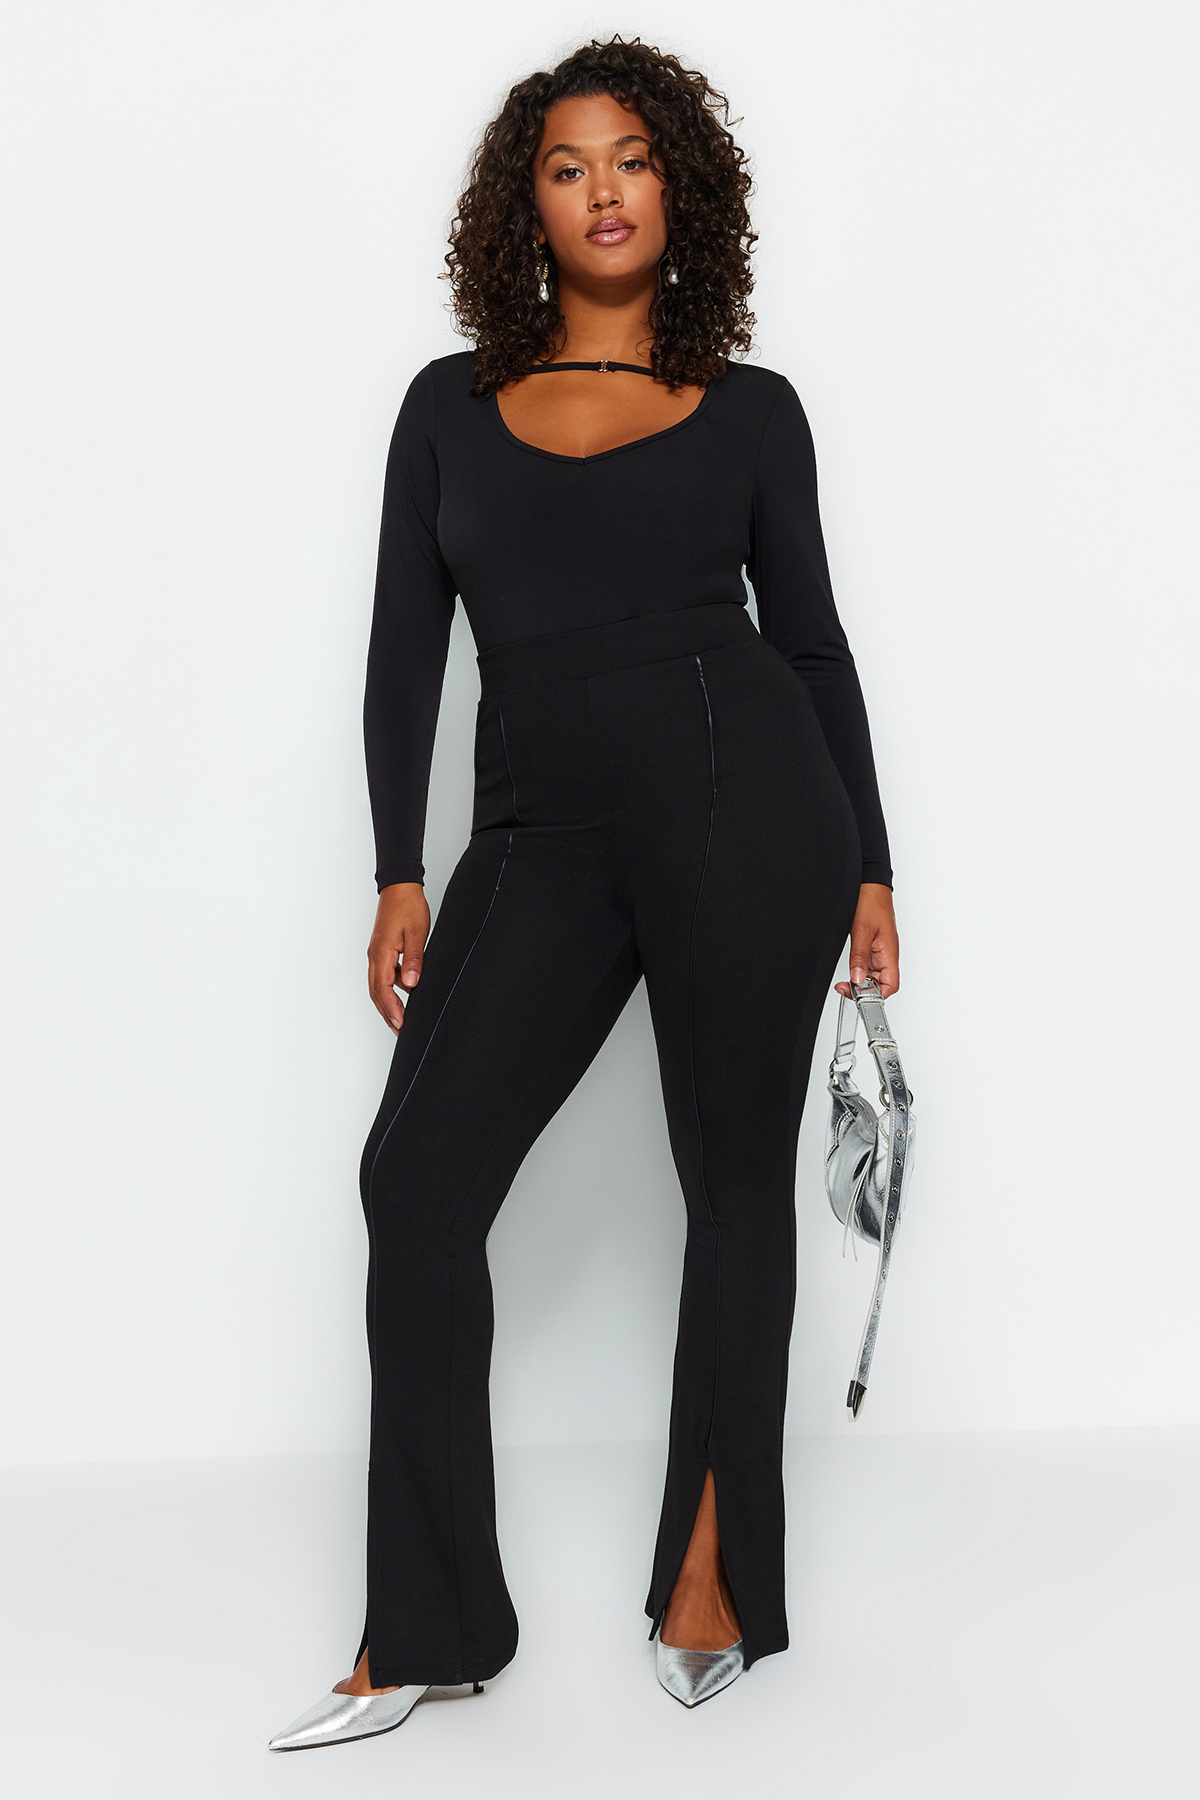 Trendyol Plus Size Black Knitted Leggings with Rib Stitch Detail and Slit